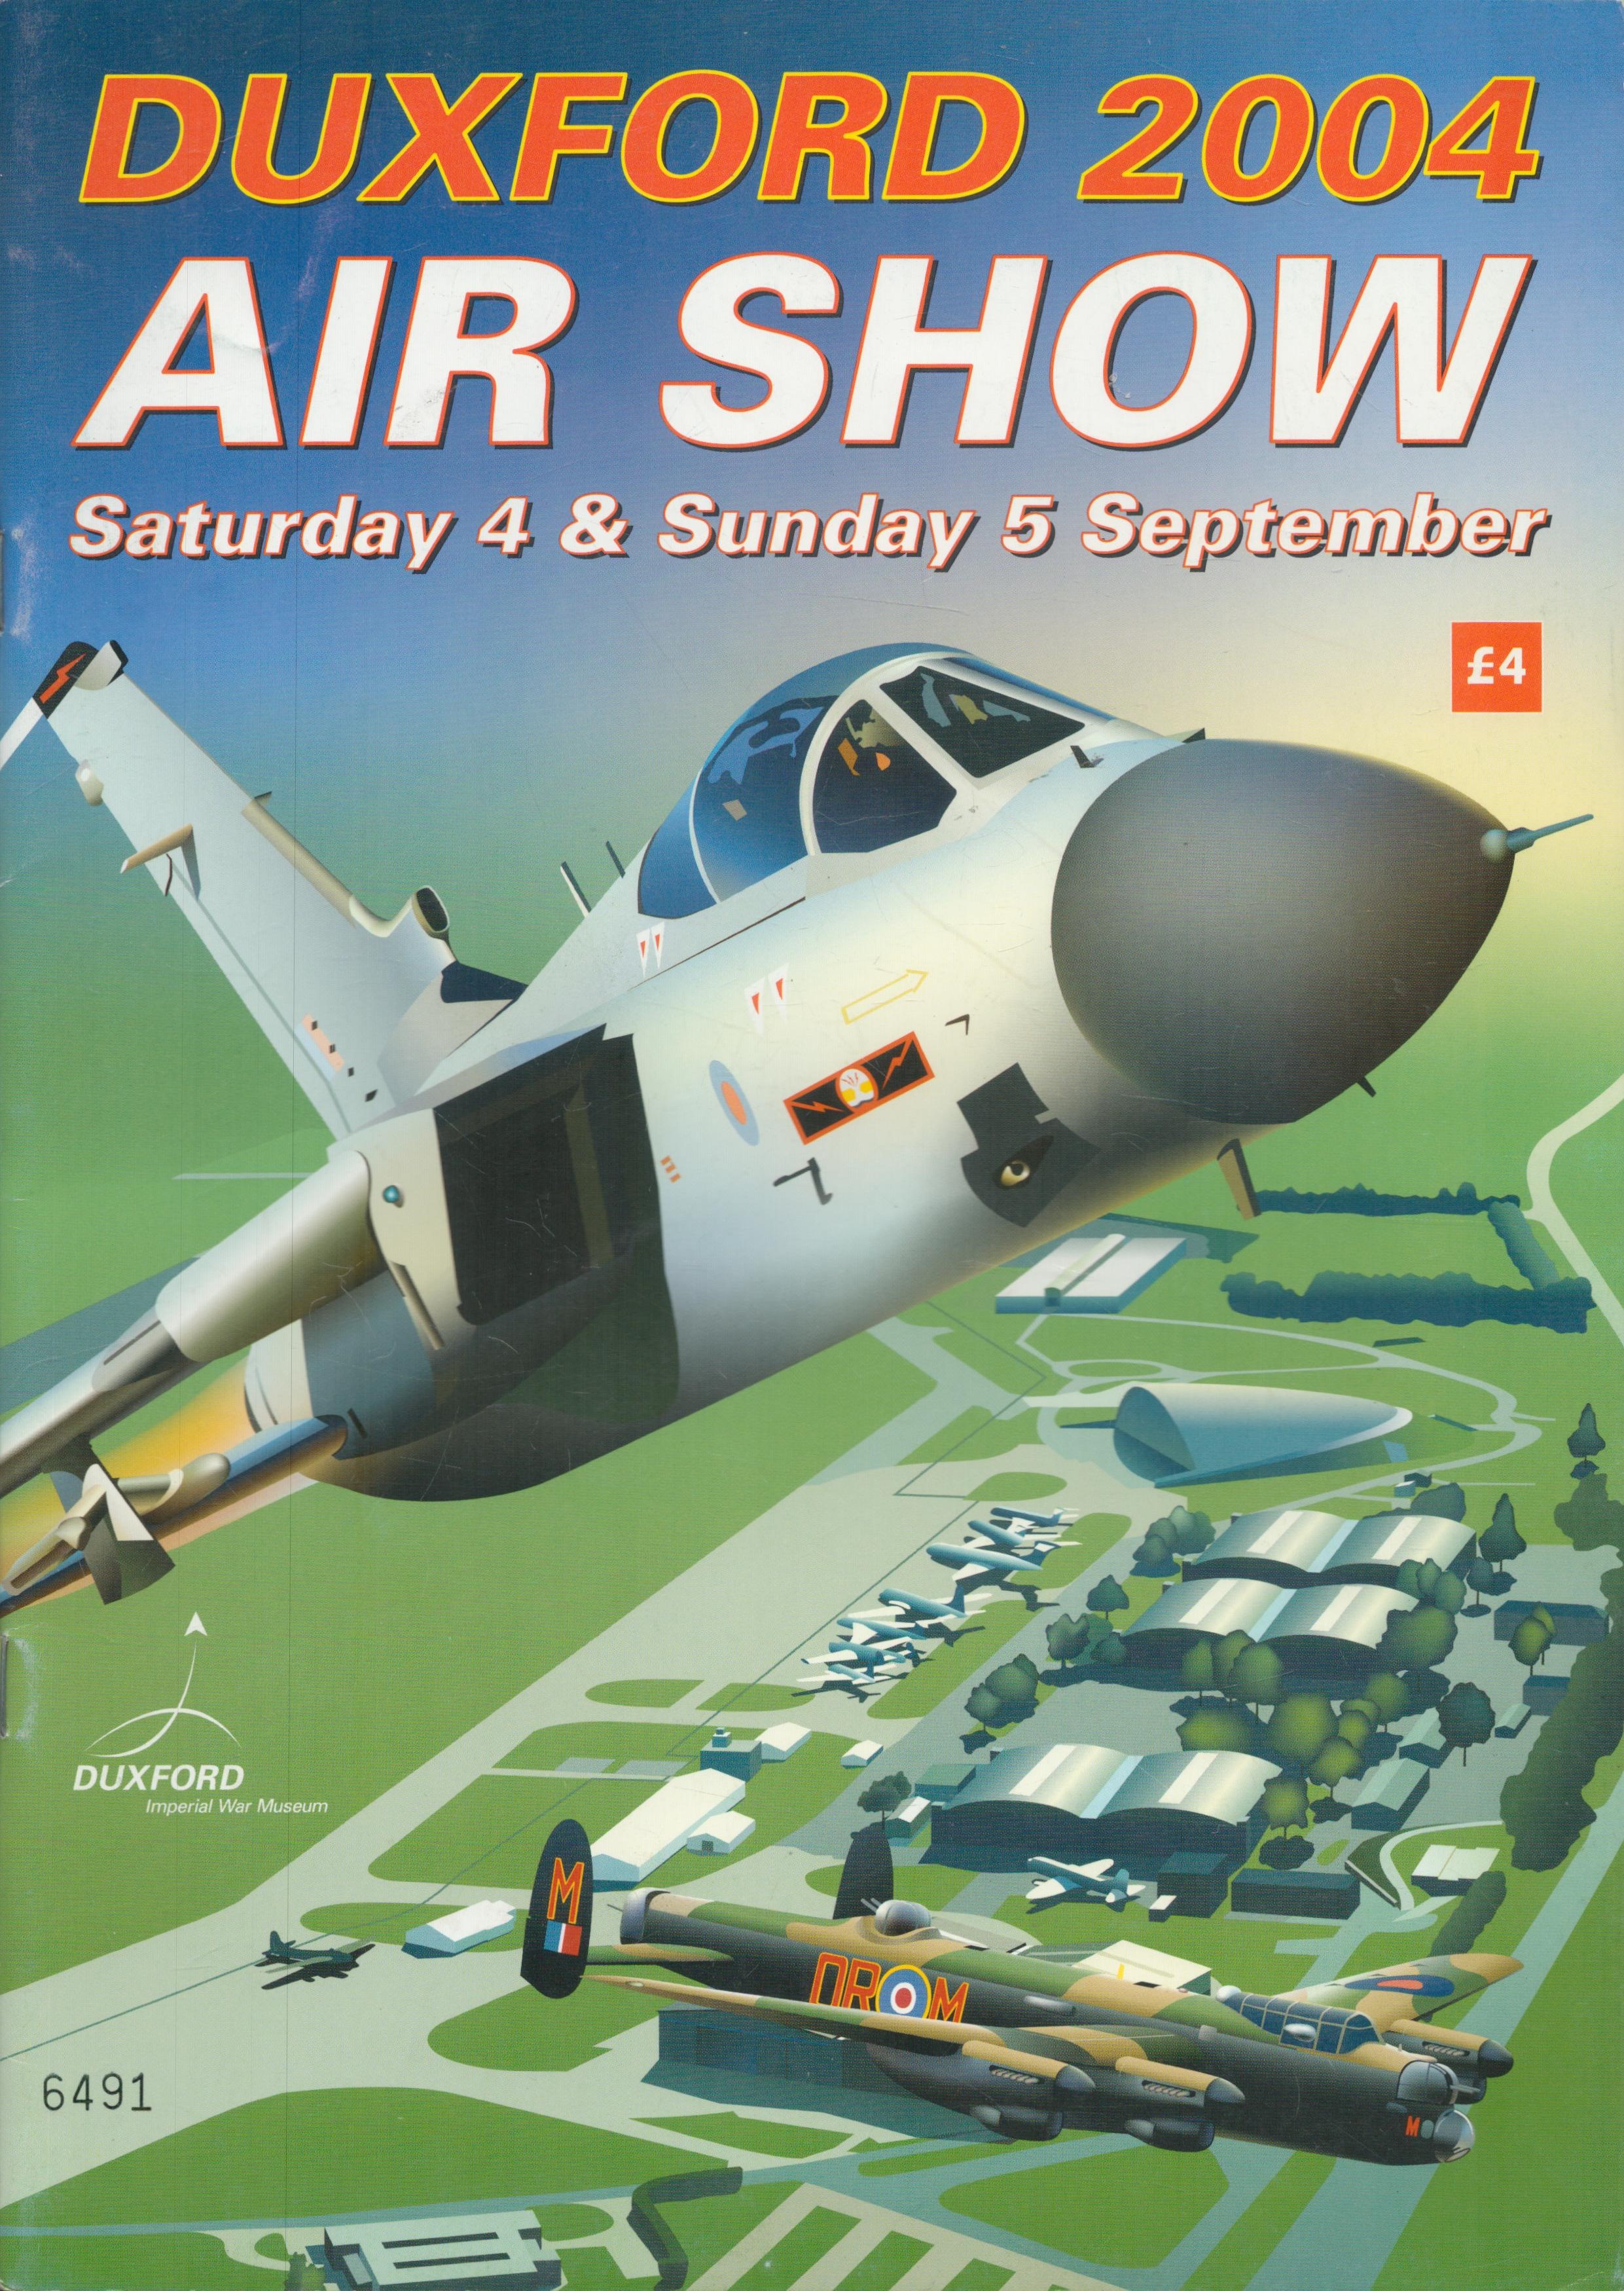 Duxford Air Show Guide 2004, Paperback. Good Condition. All autographs come with a Certificate of